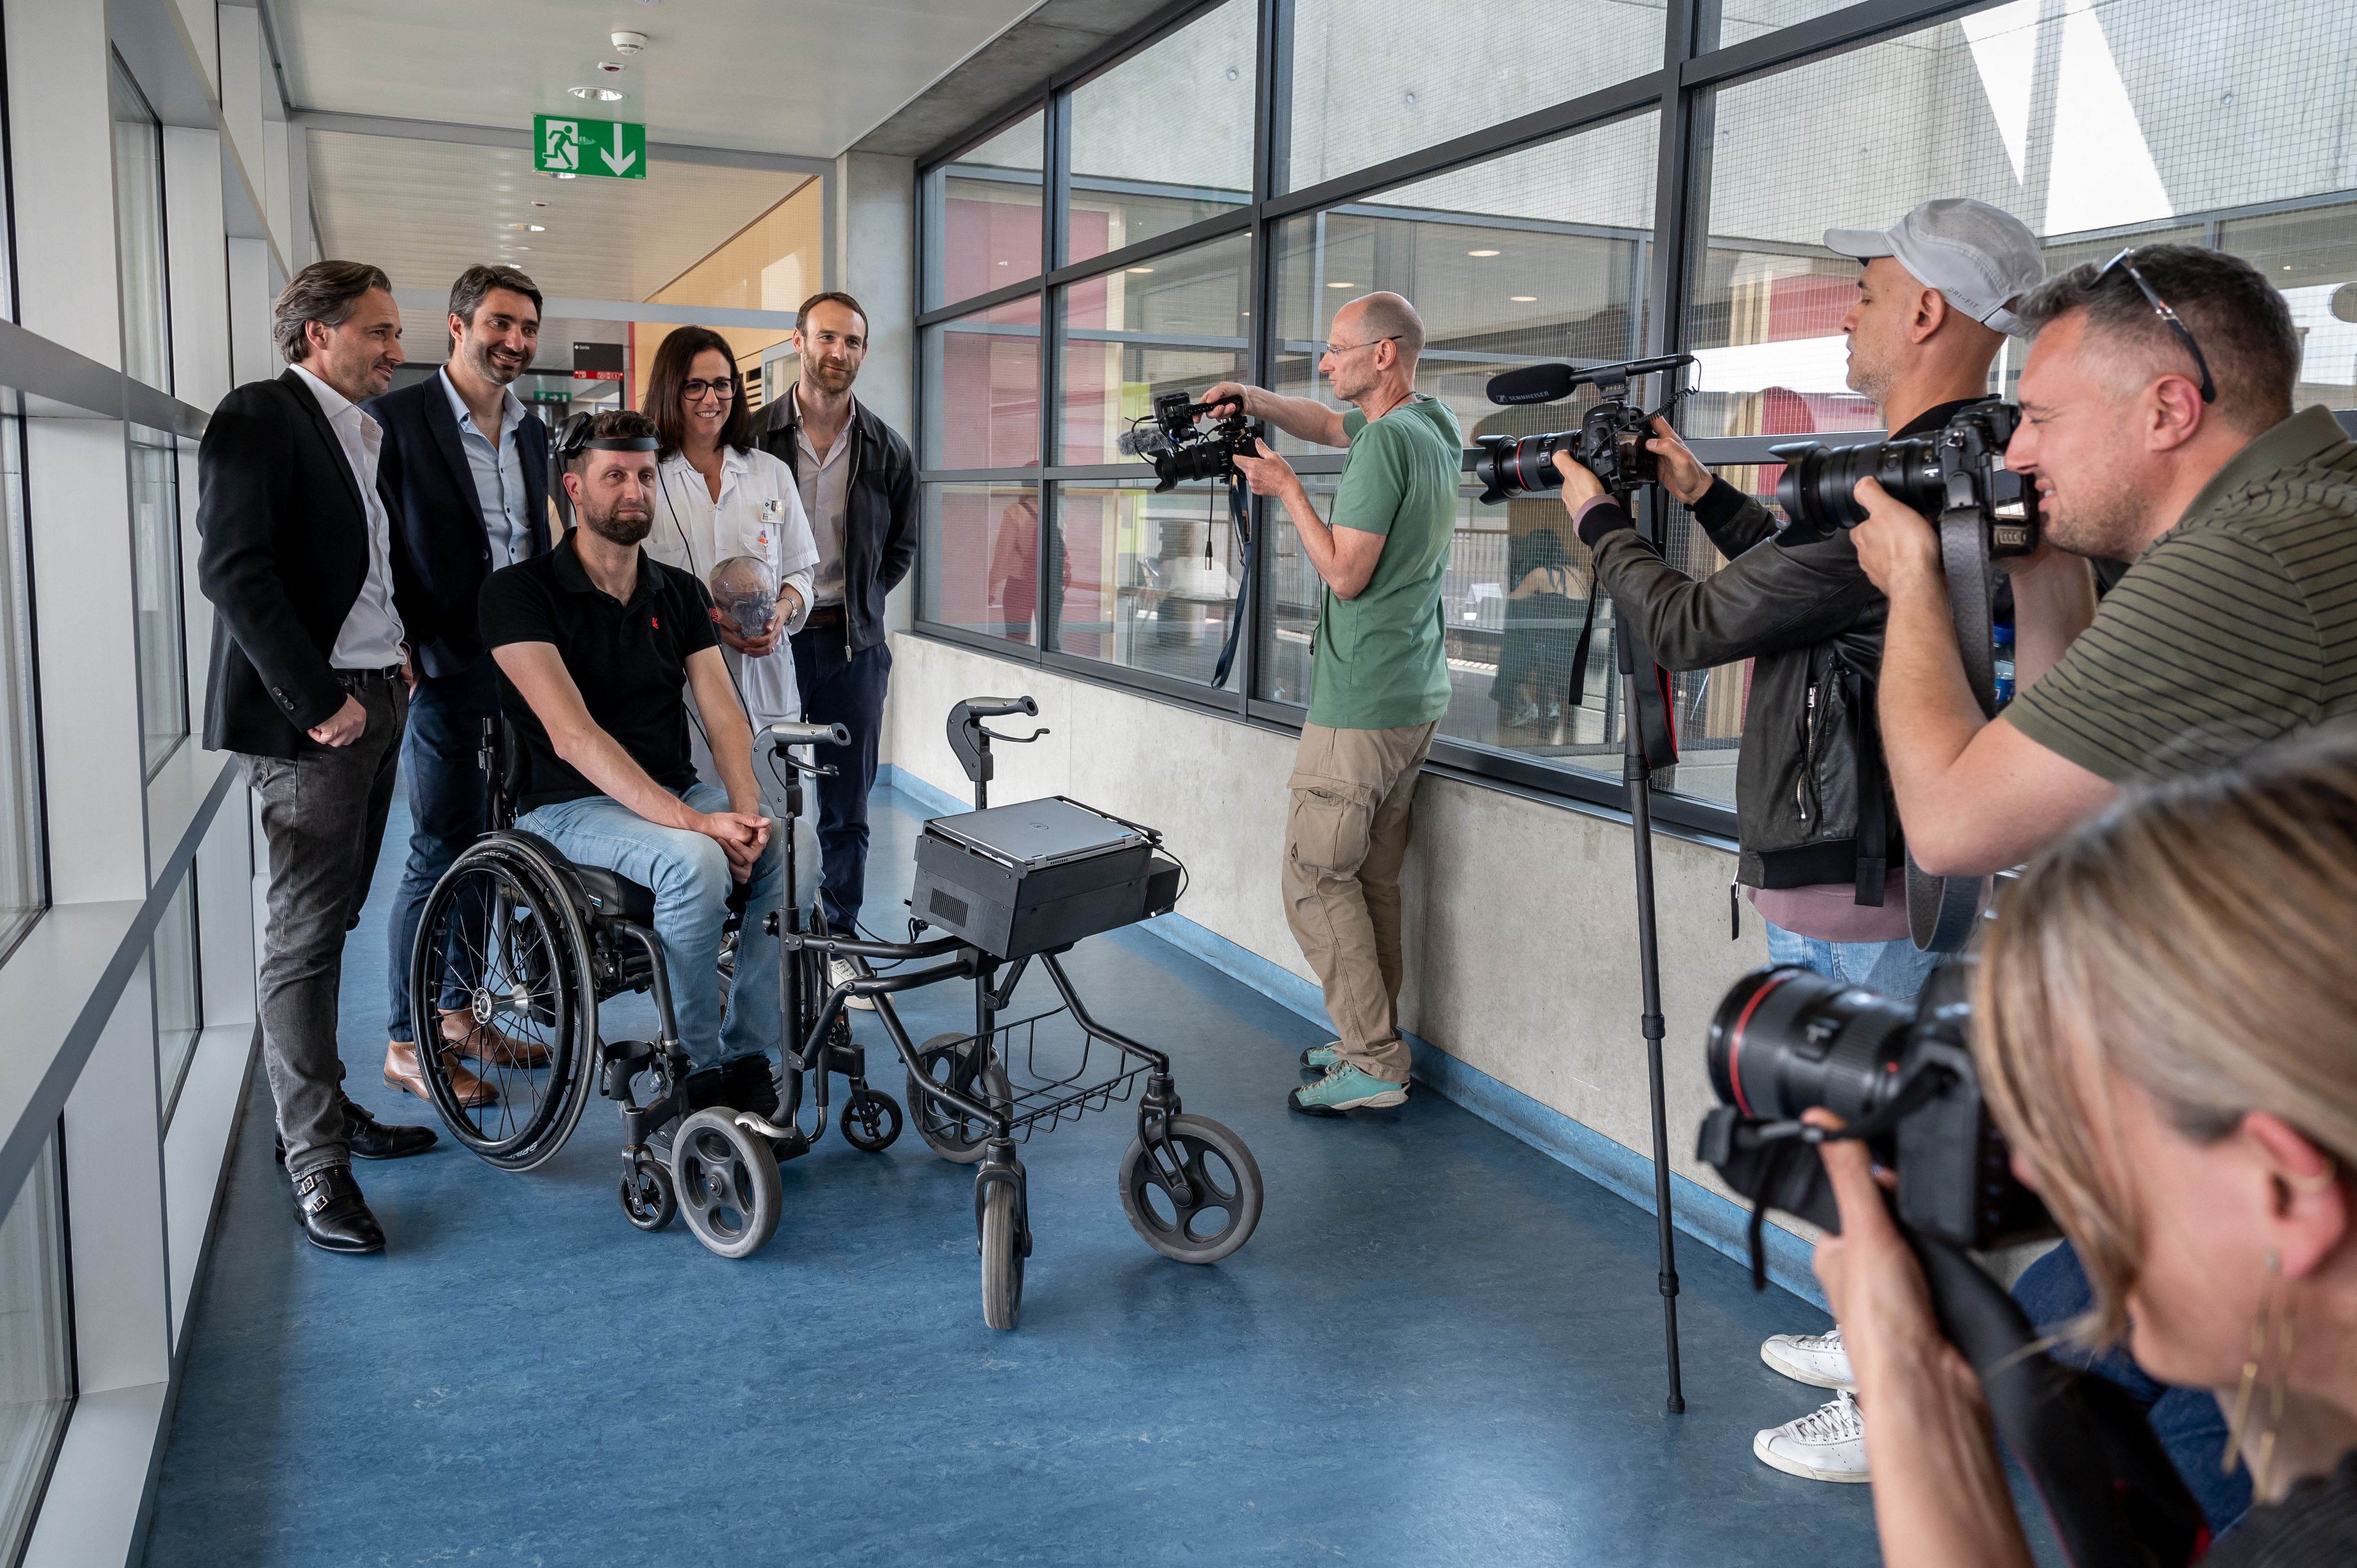 Paralyzed man regains his ability to walk thanks to artificial intelligence 